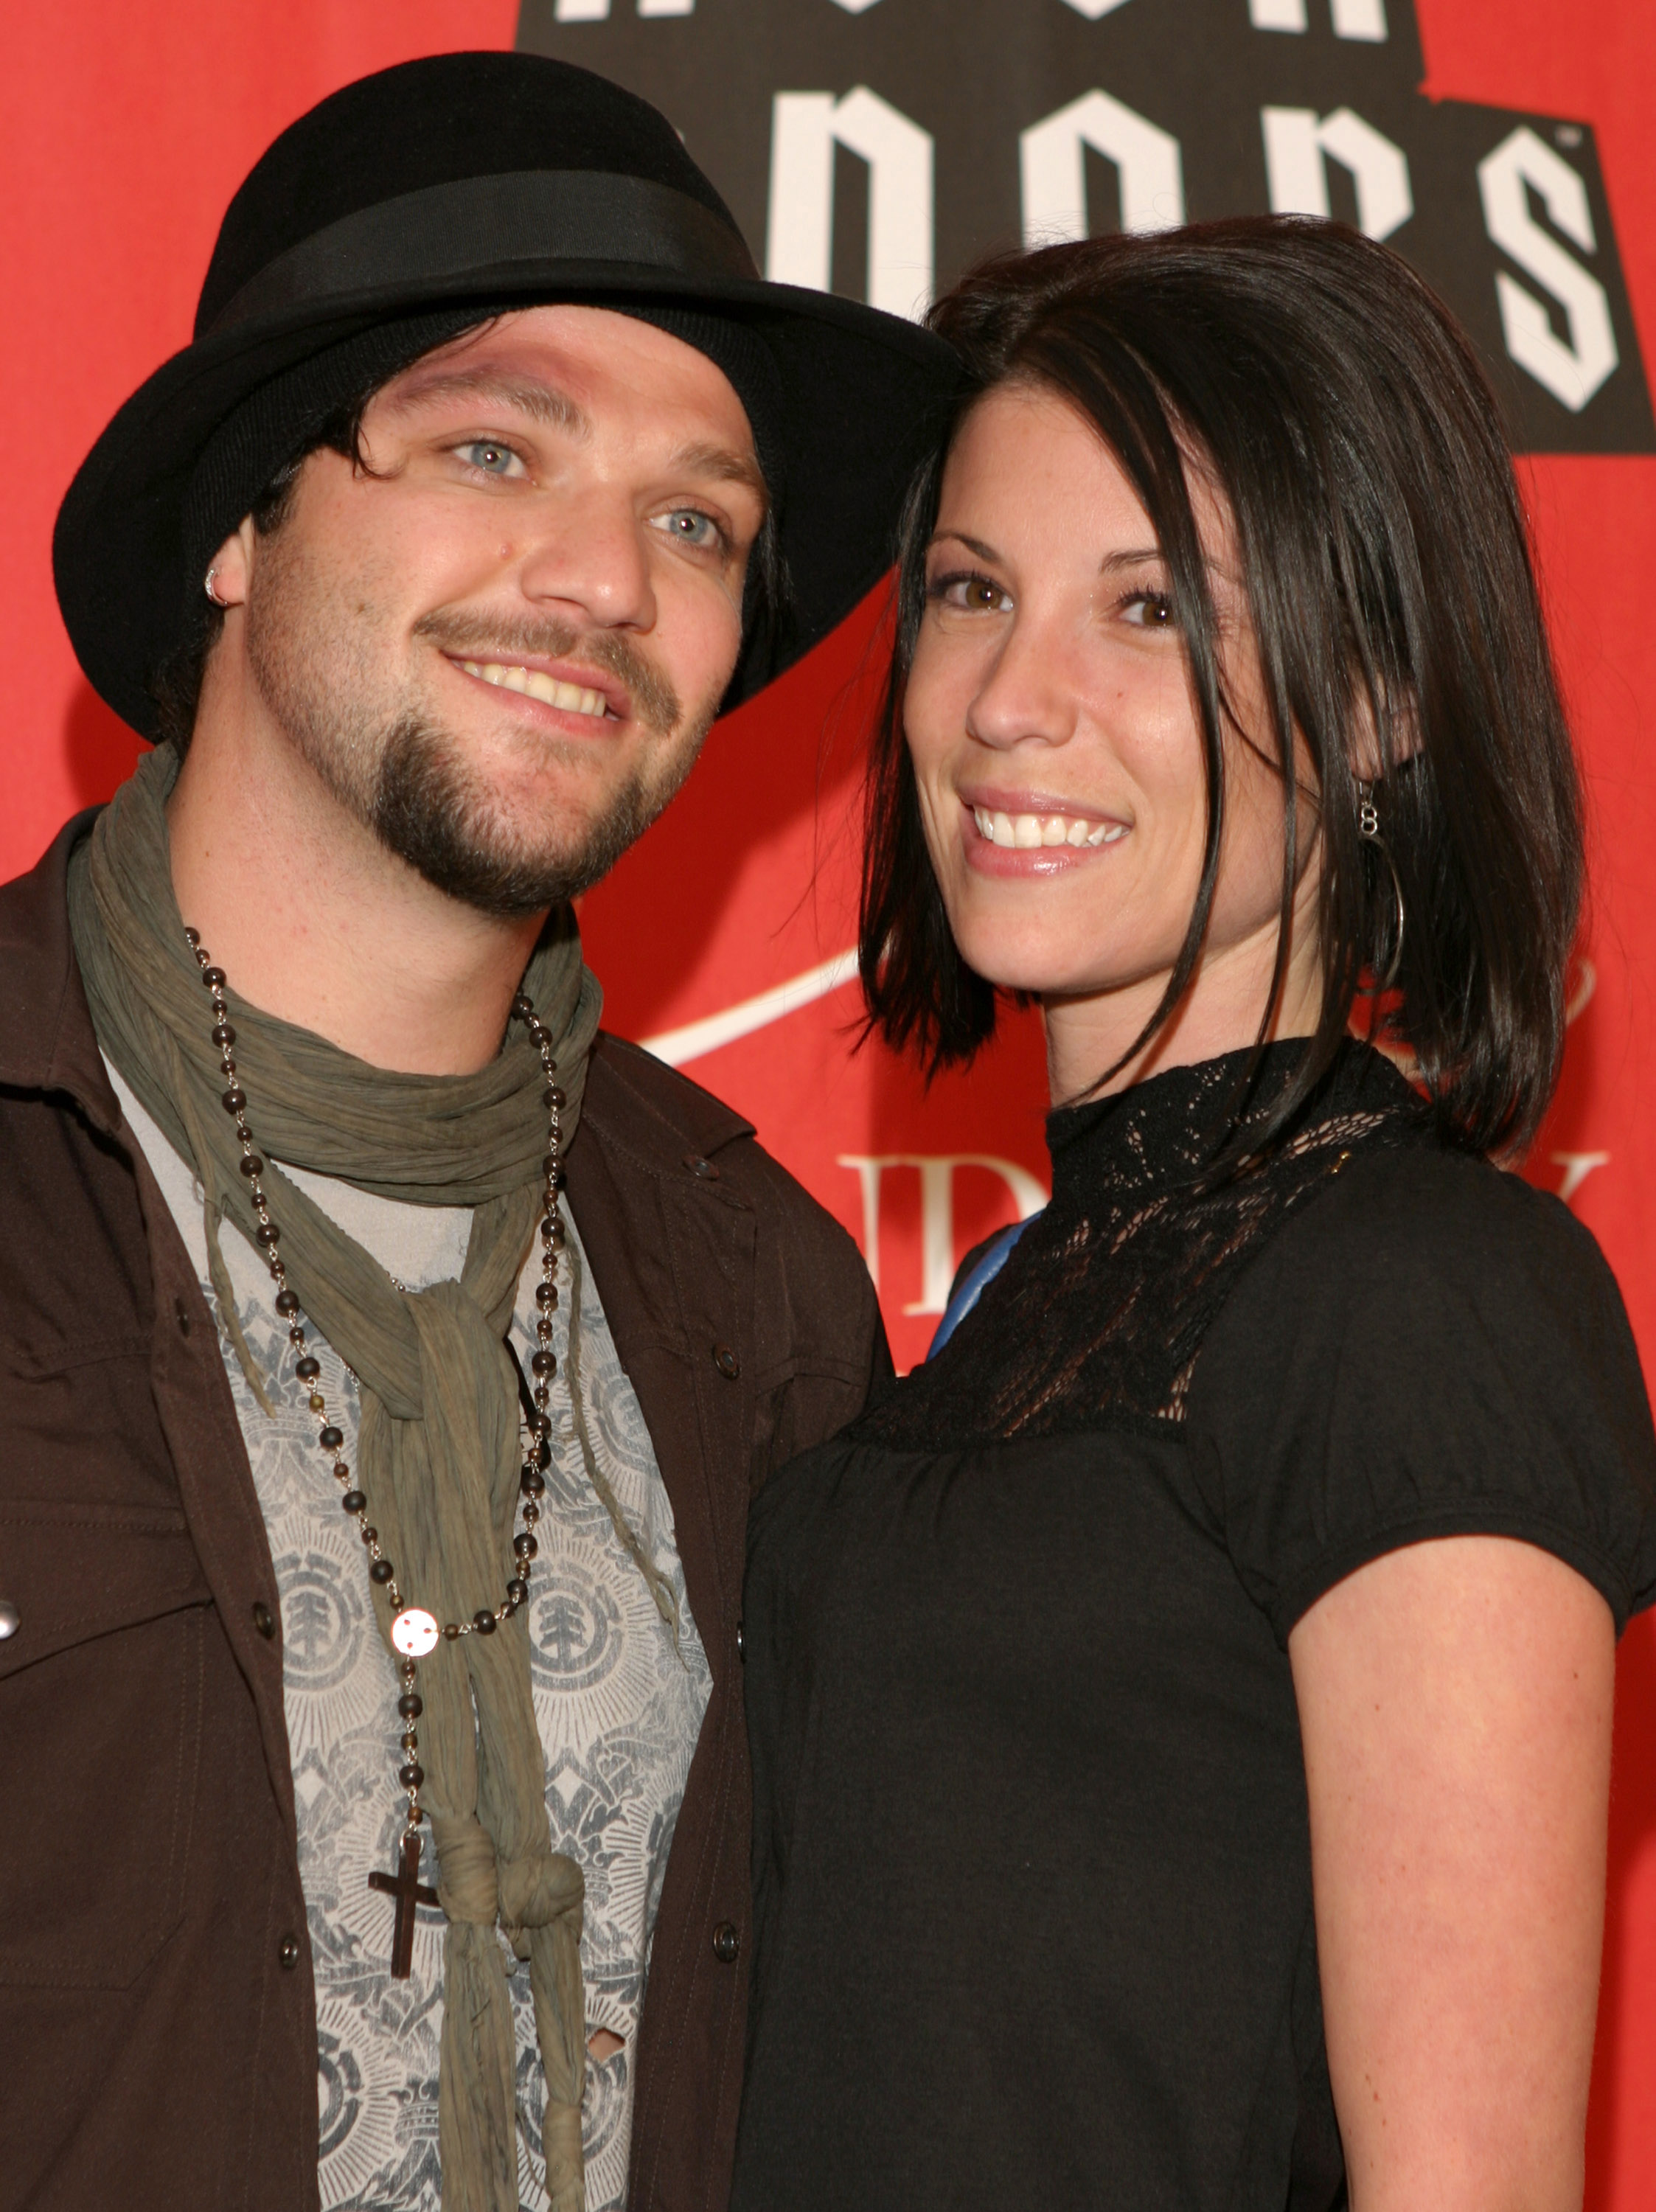 Bam Margera and Missy Rothstein during 2007 VH1 Rock Honors - Press Room at Mandalay Bay in Las Vegas, Nevada, United States on May 12, 2007 | Source: Getty Images